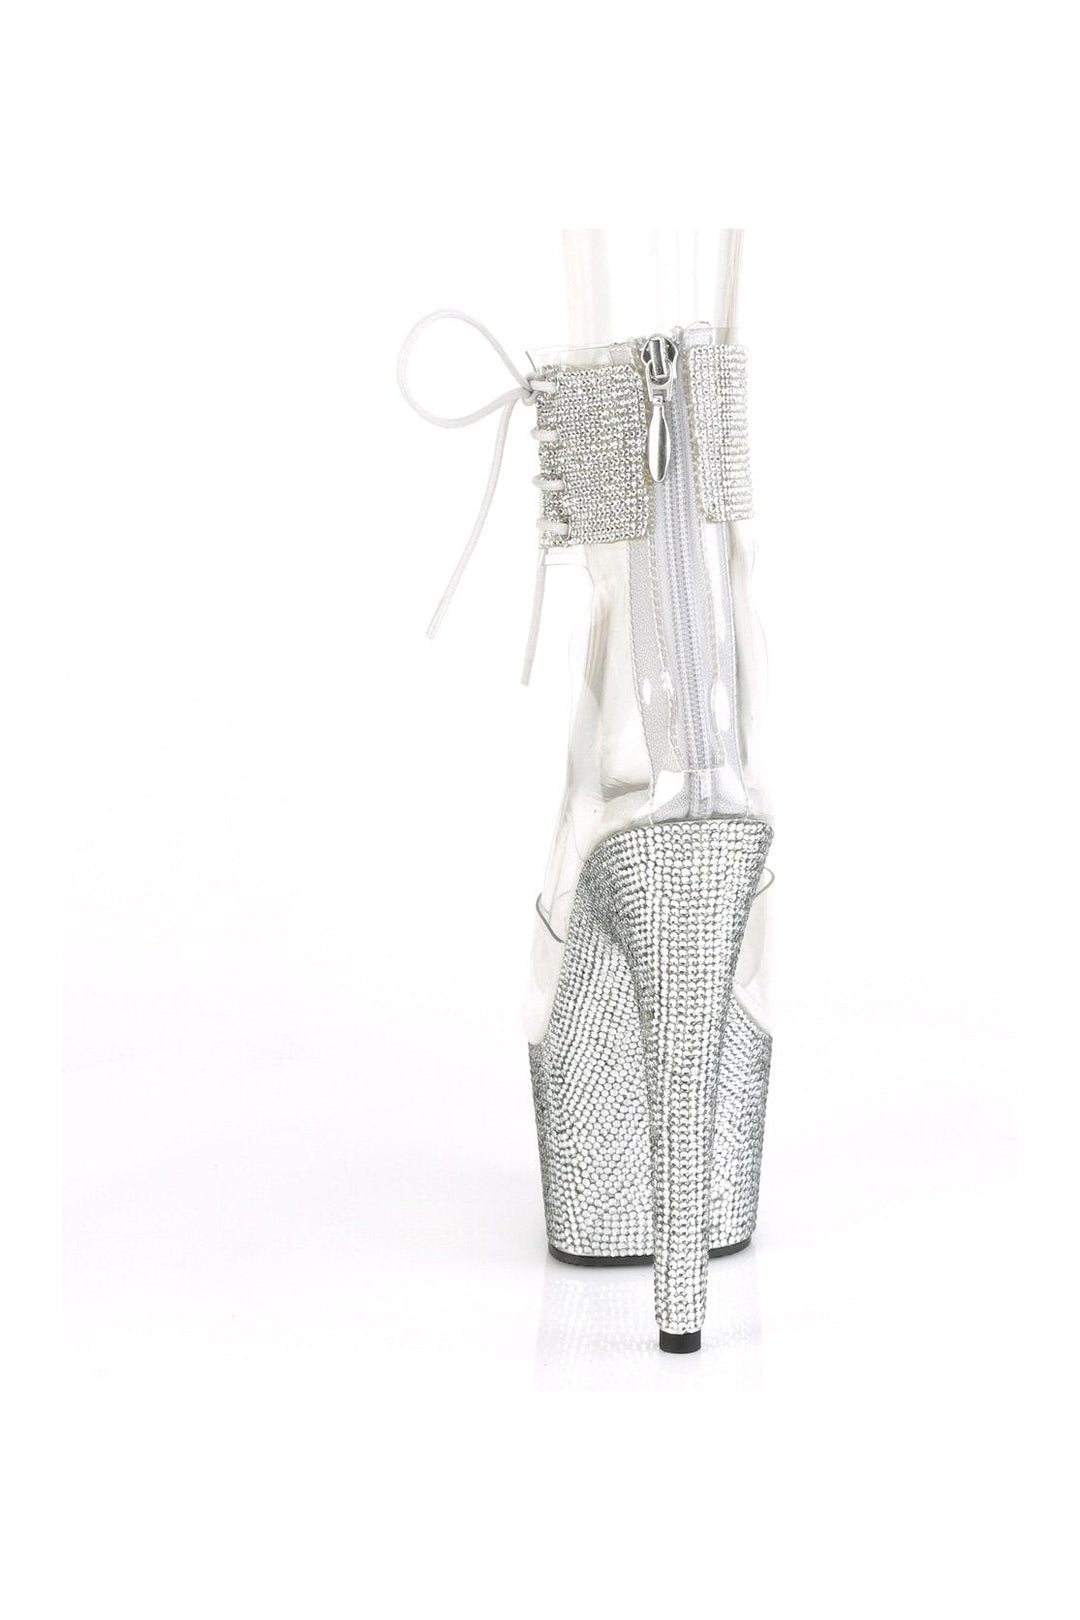 BEJEWELED-724RS Exotic Sandal | Clear Vinyl-Sandals-Pleaser-SEXYSHOES.COM